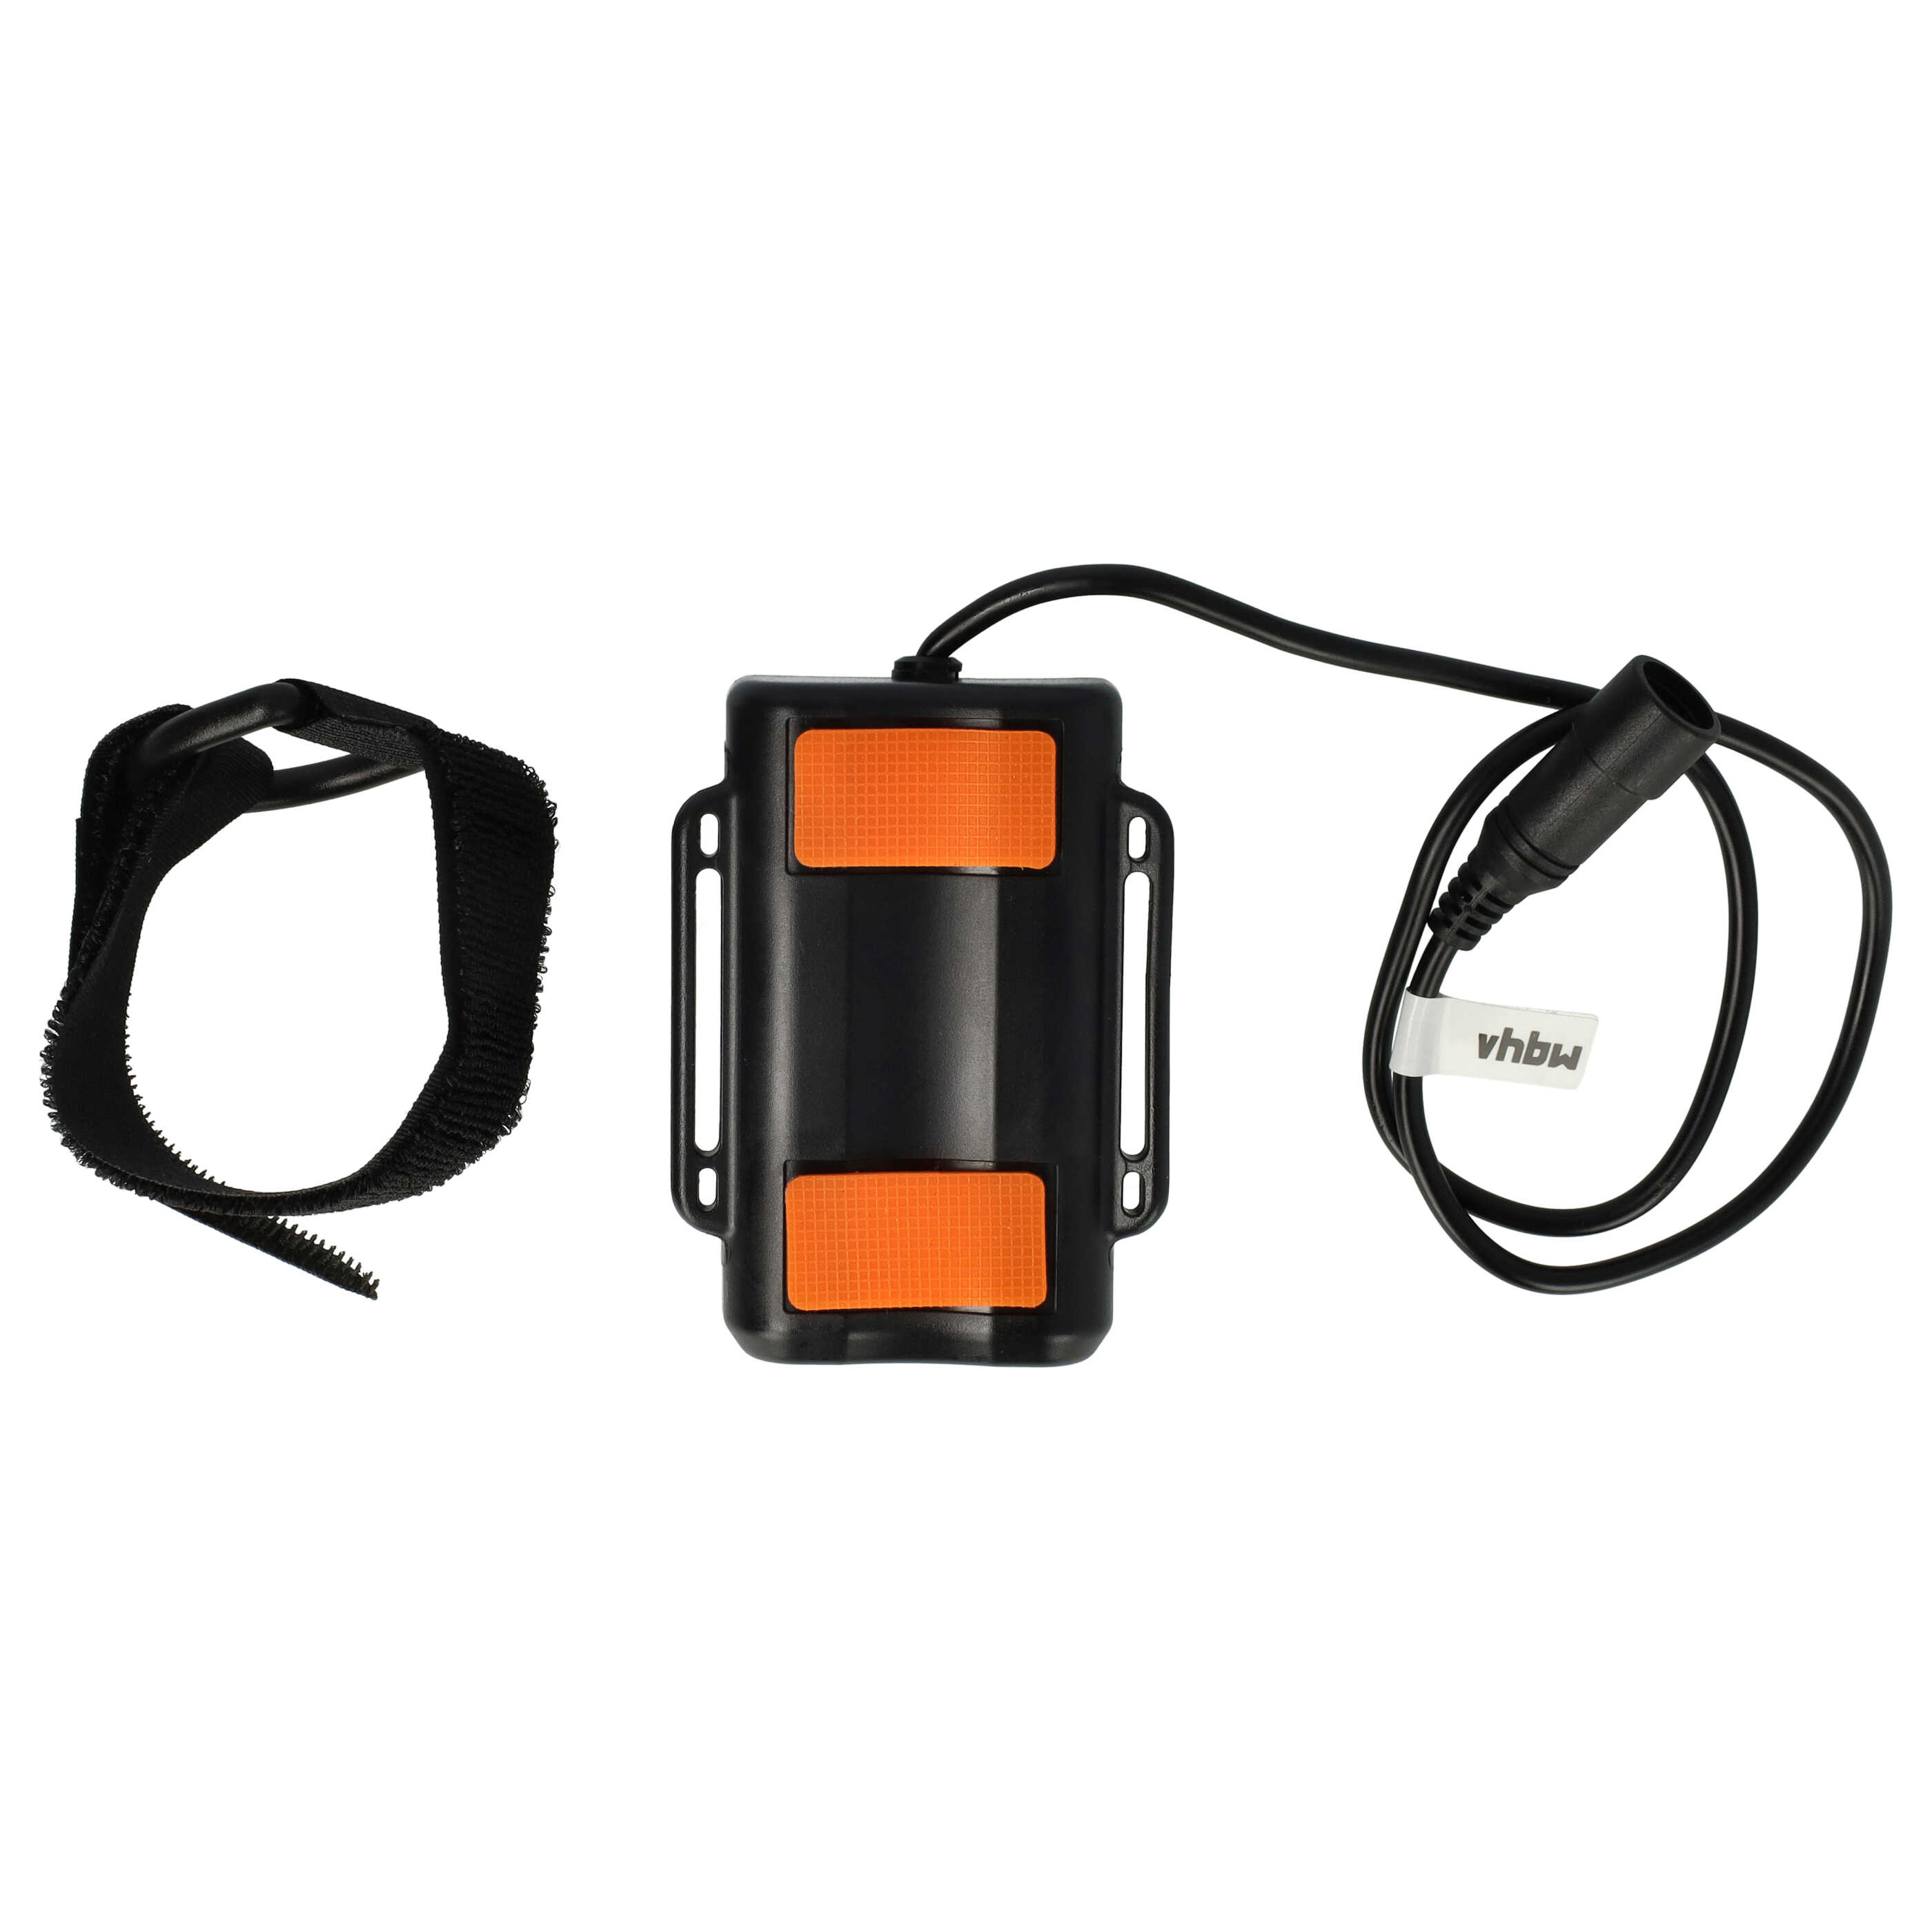 Li-Ion-battery pack- 6000mAh 8.4V waterproof + Charger - for bicycle lamp light